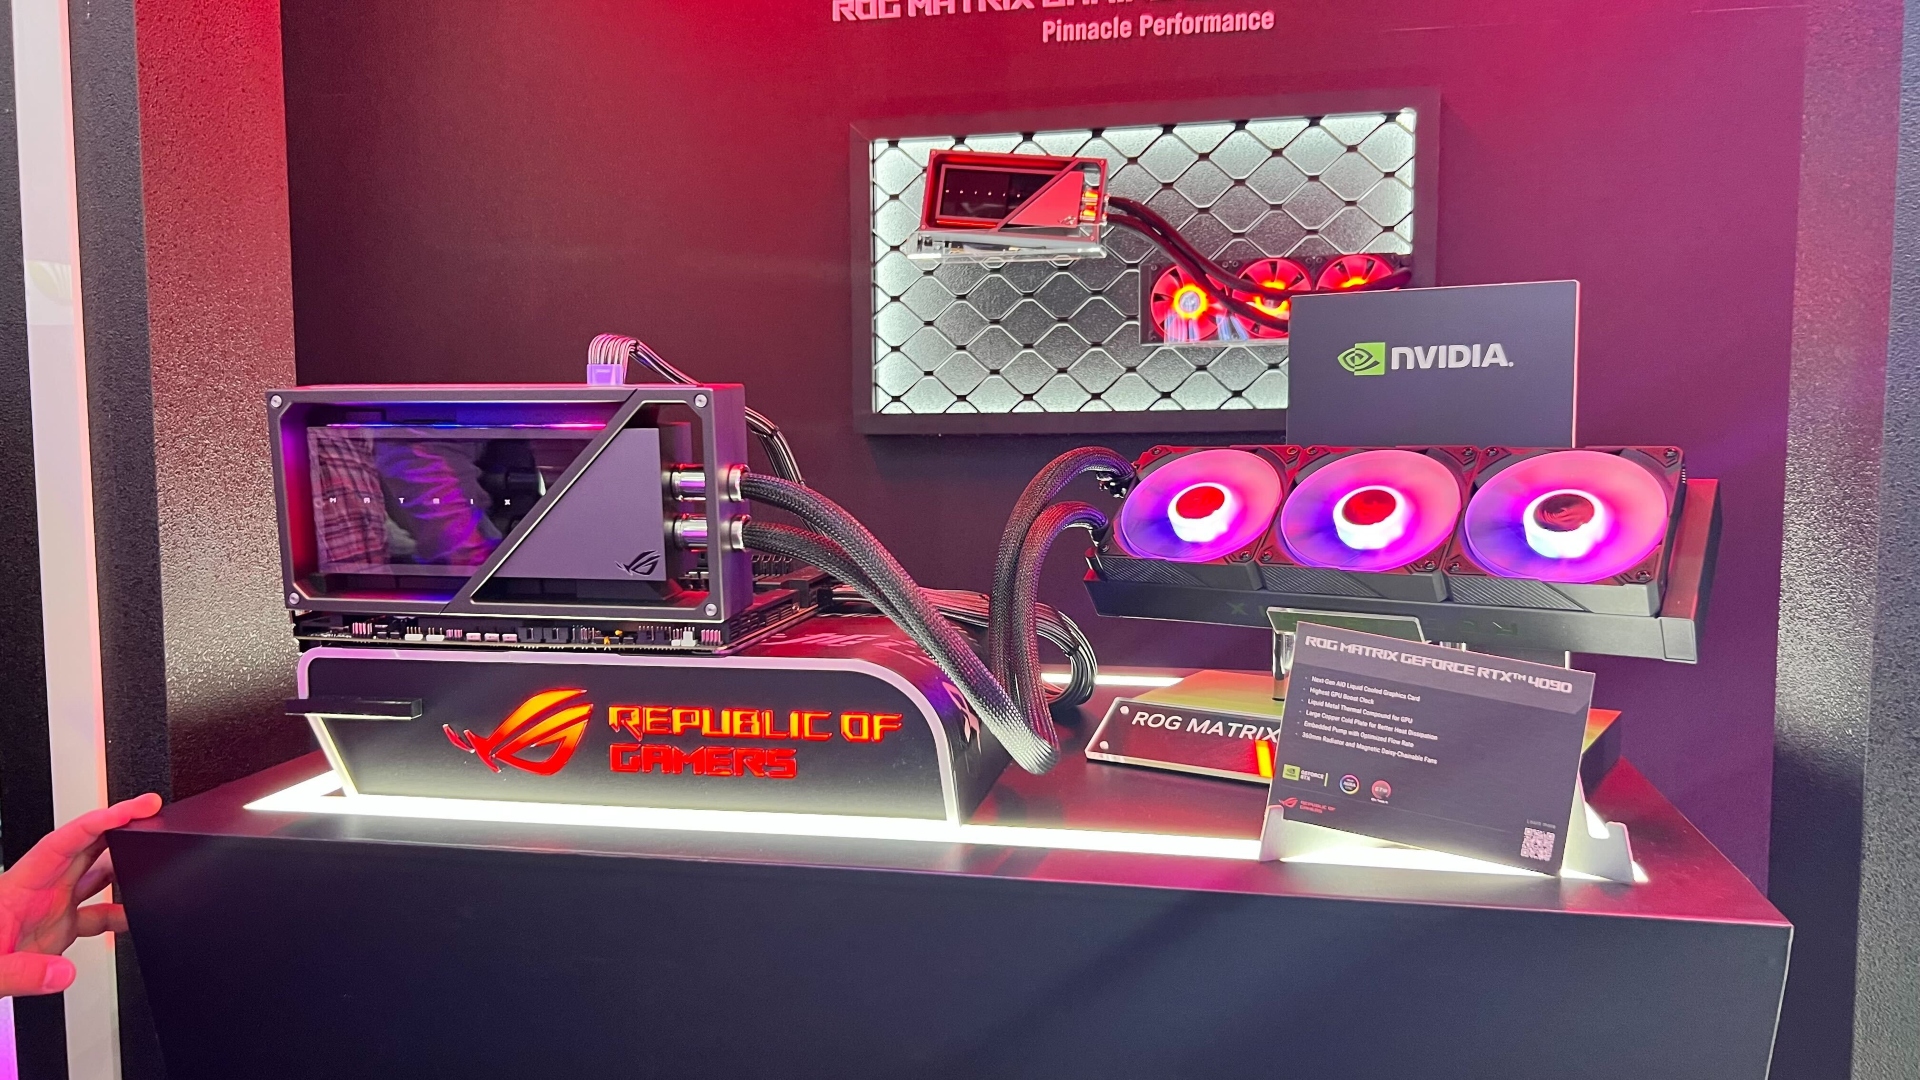 Asus reveals a gorgeous new liquid-cooled GPU, and I'm excited